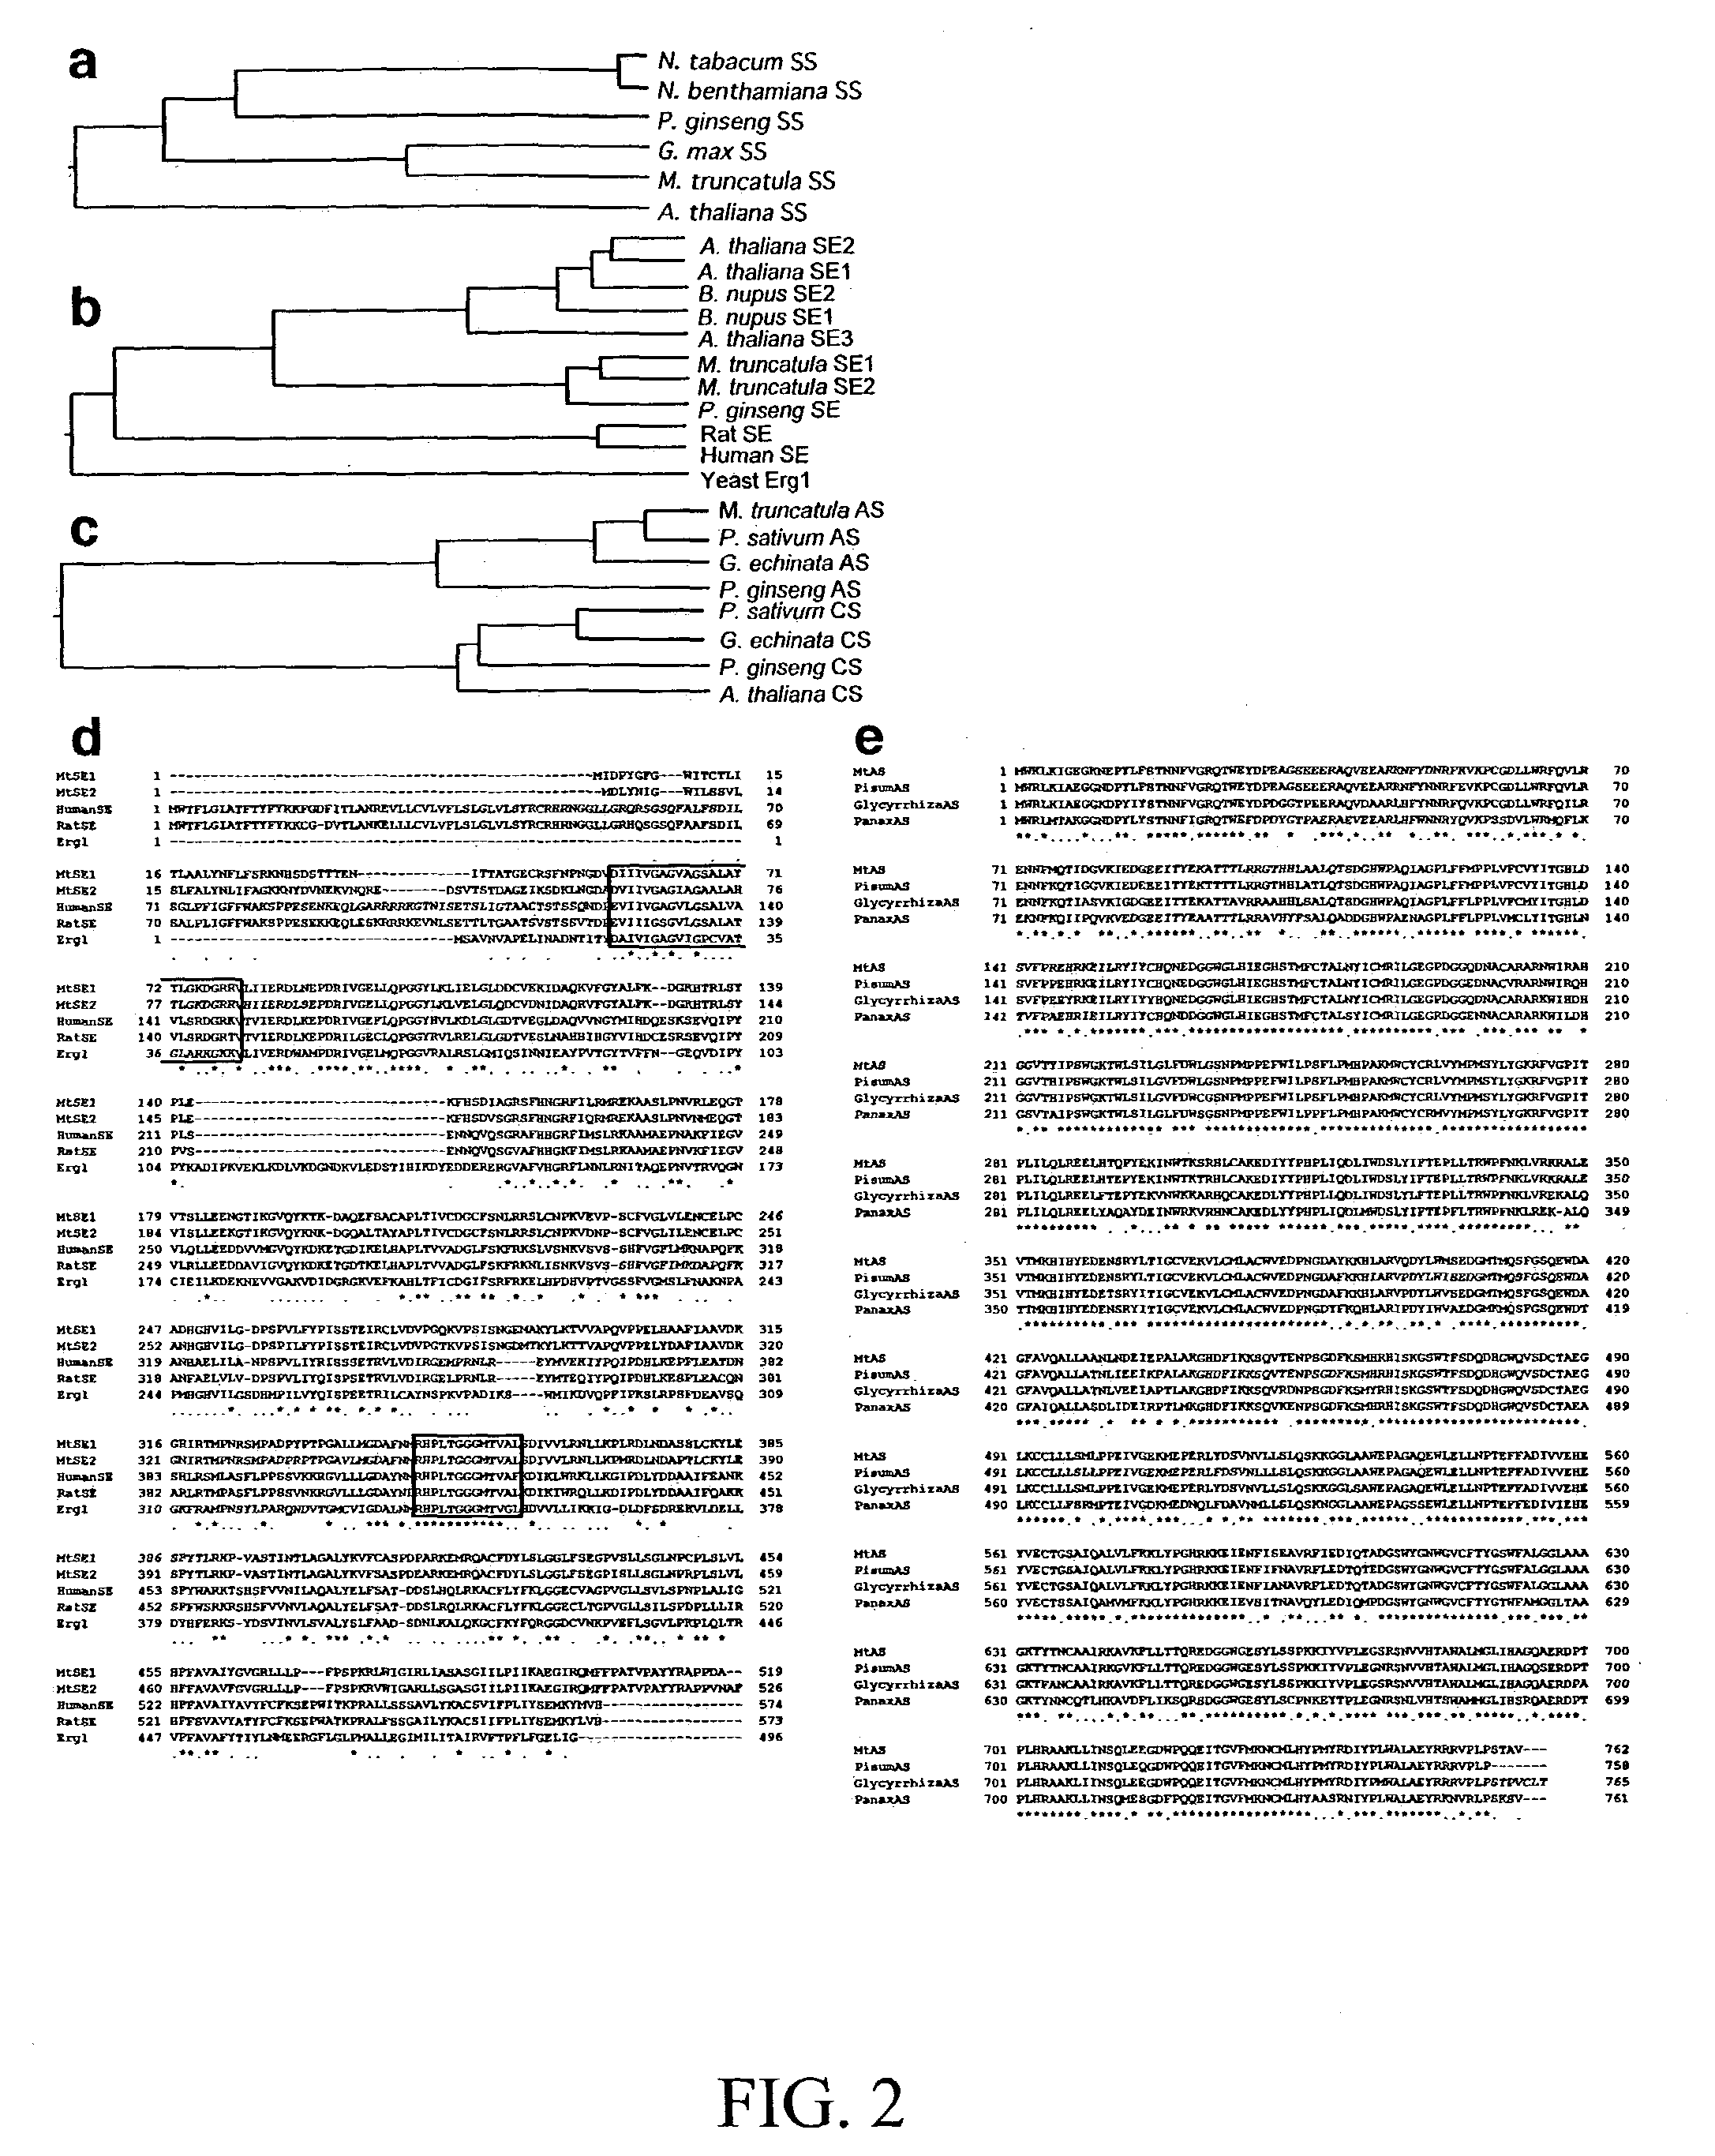 Methods of identifying genes for the manipulation of triterpene saponins